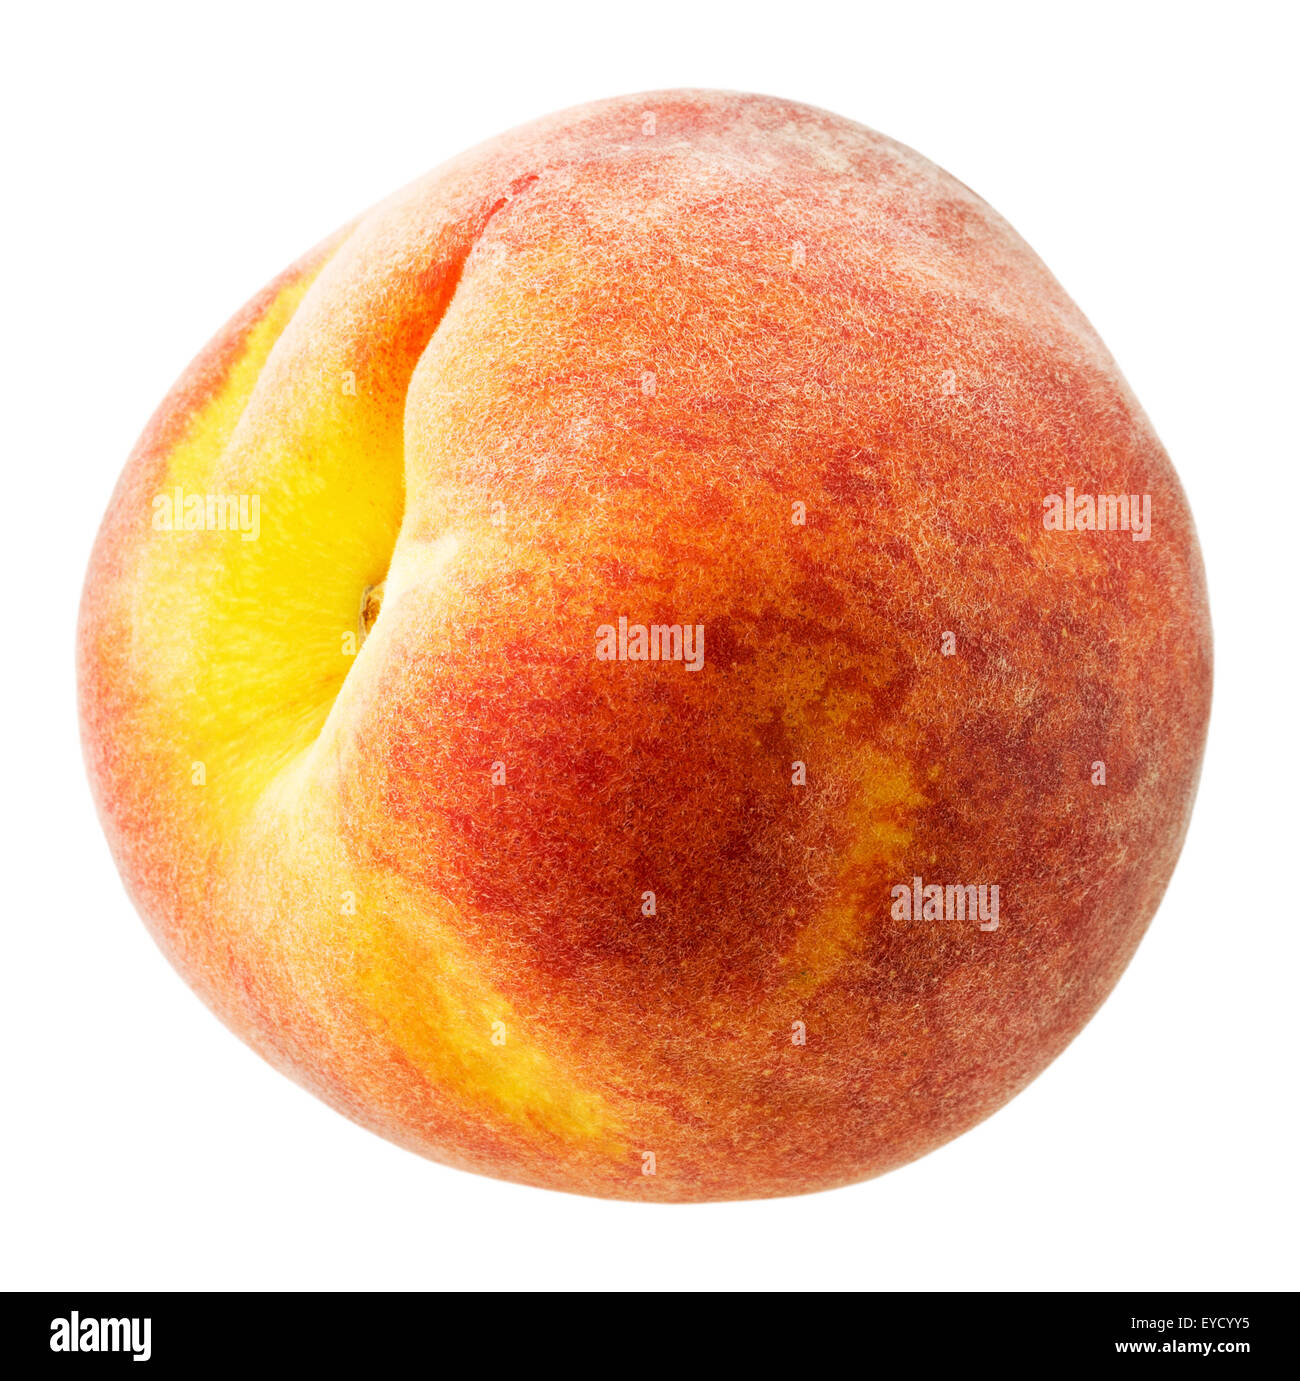 peach isolated on the white background. Stock Photo